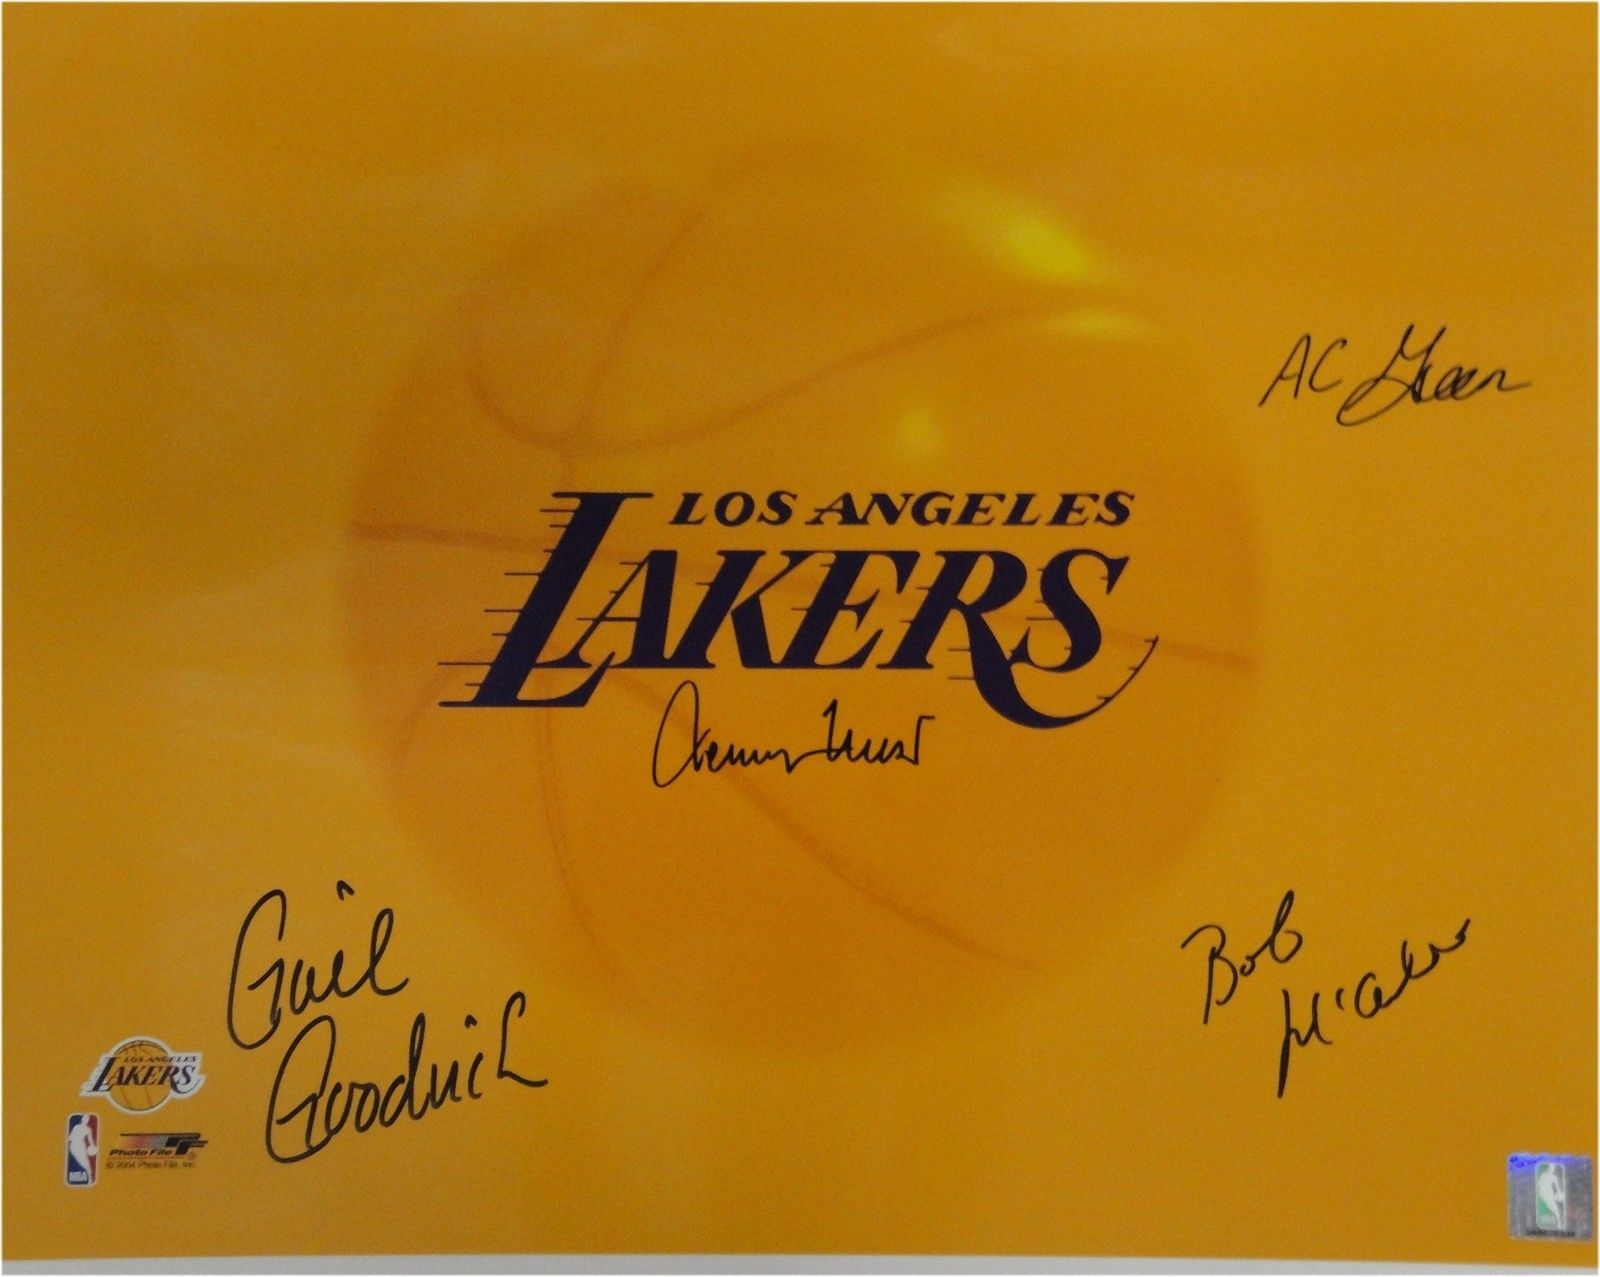 Bob McAdoo Autographed and Framed Los Angeles Lakers Jersey